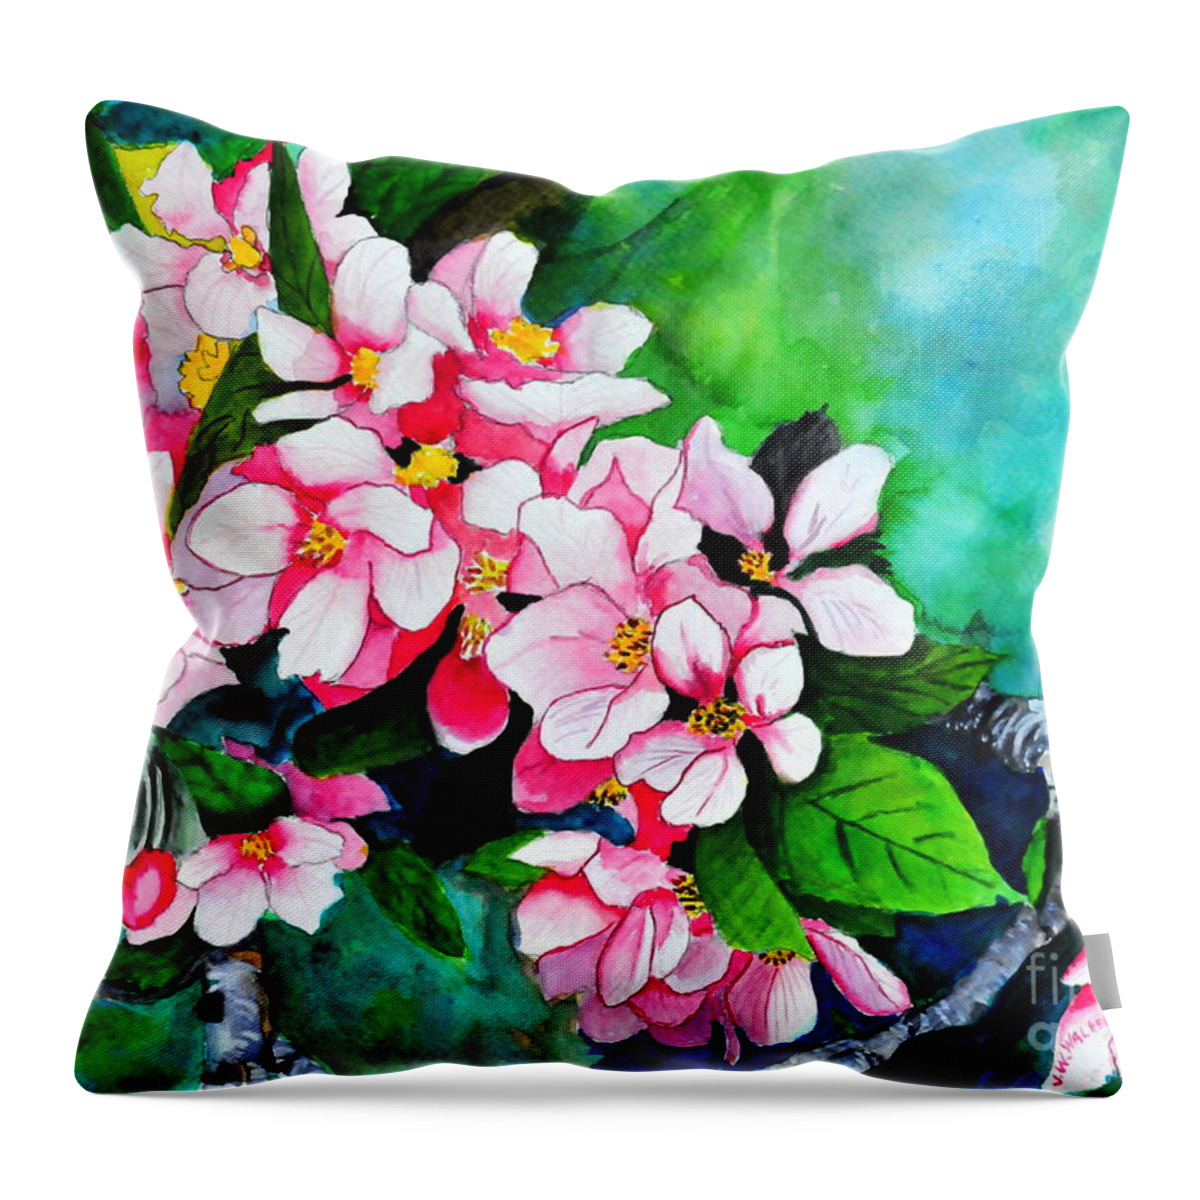 Apple Throw Pillow featuring the painting Apple Blossoms by John W Walker